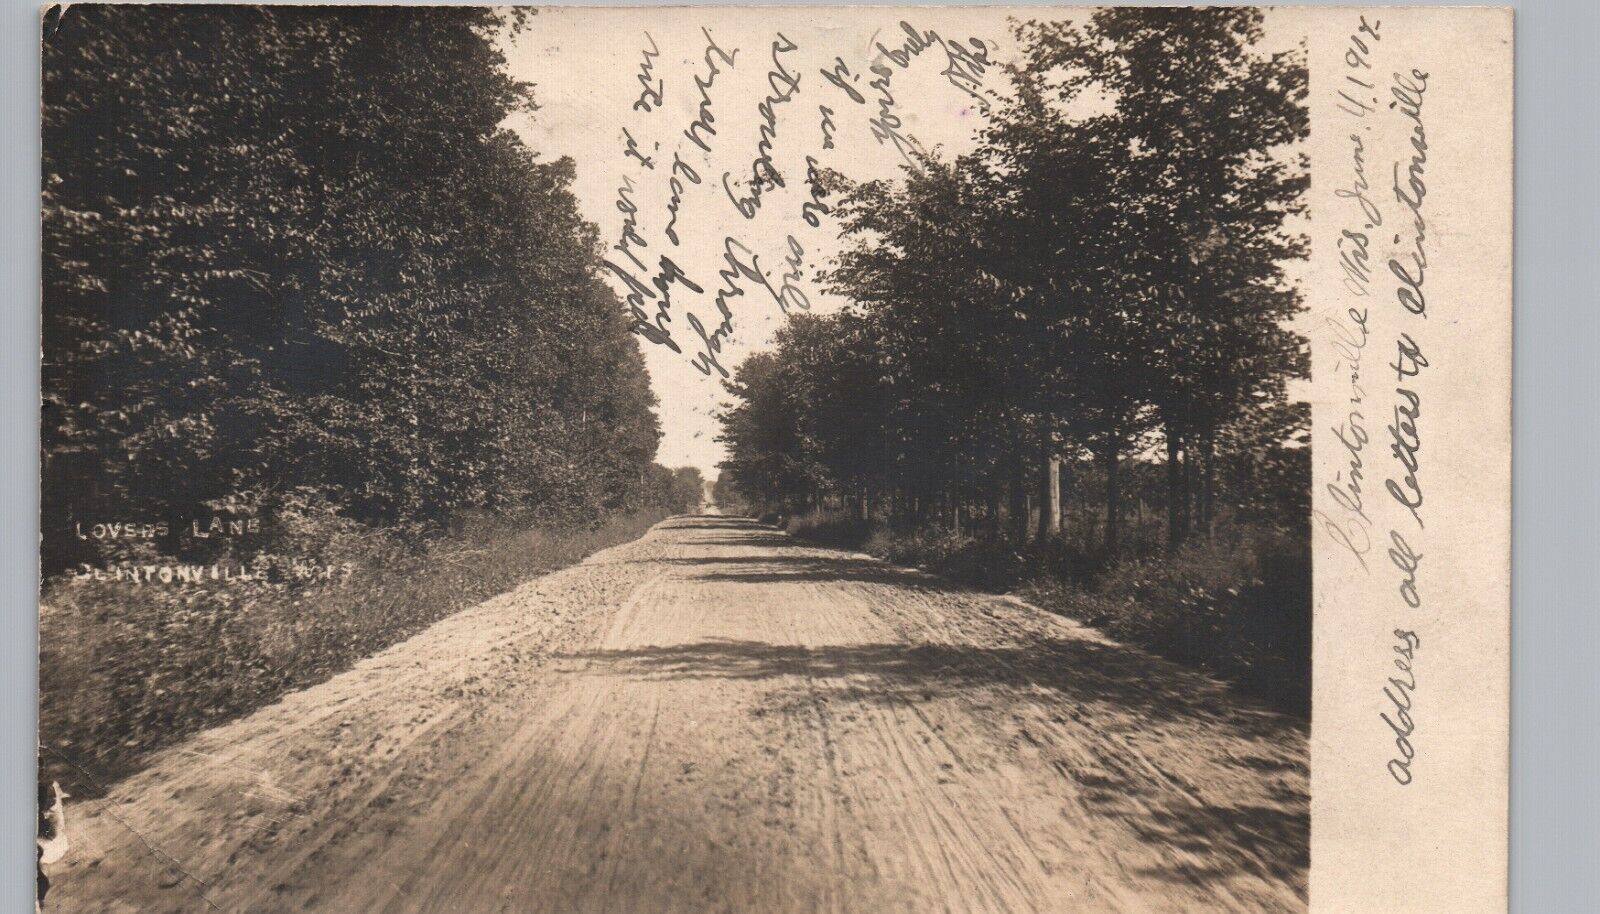 LOVERS LANE clintonville wi real photo postcard rppc wisconsin dirt road